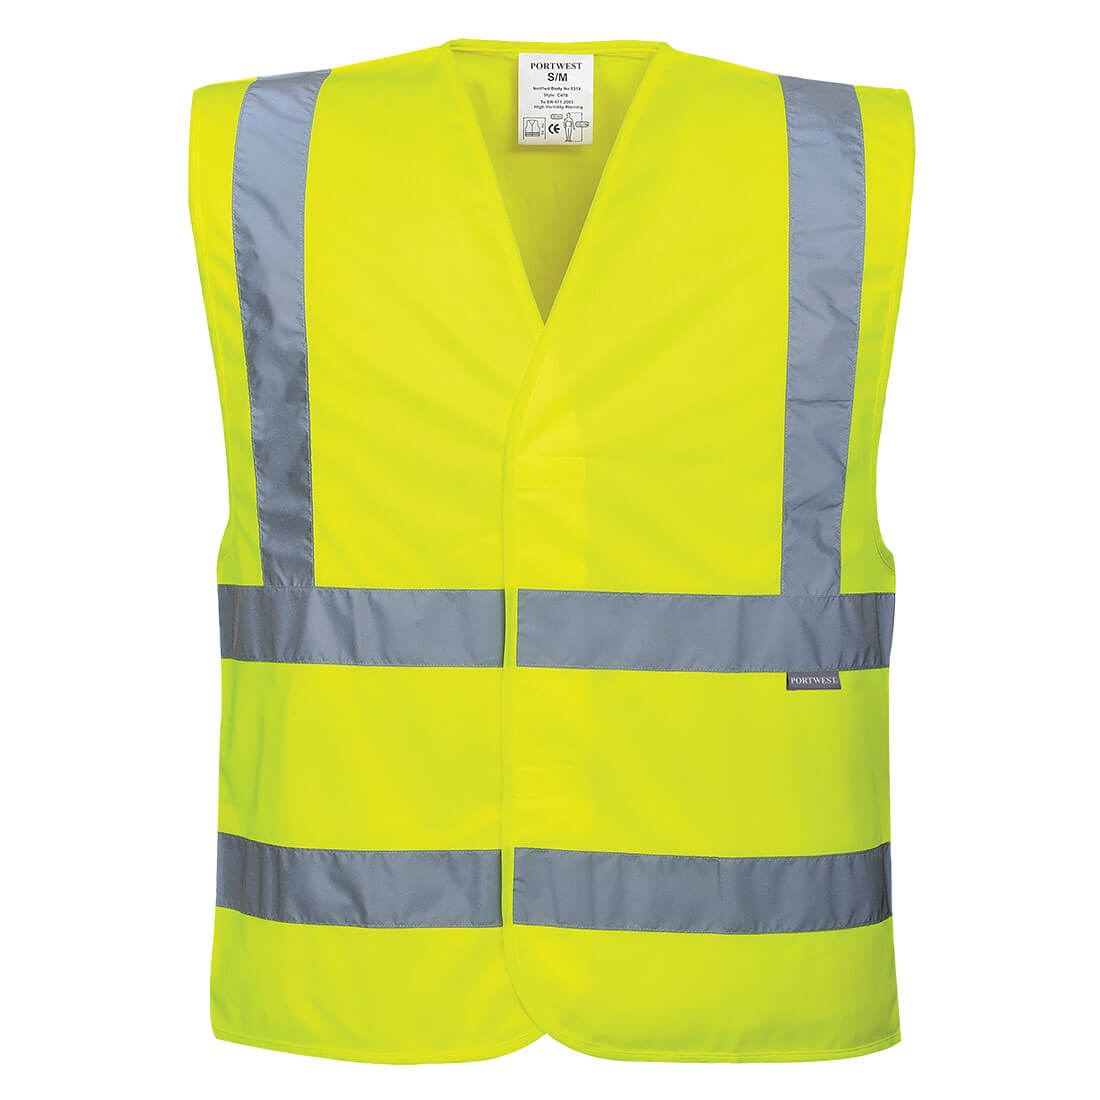 Image of Portwest Two Band and Brace Class 2 Hi Vis Waistcoat Yellow 2XL / 3XL